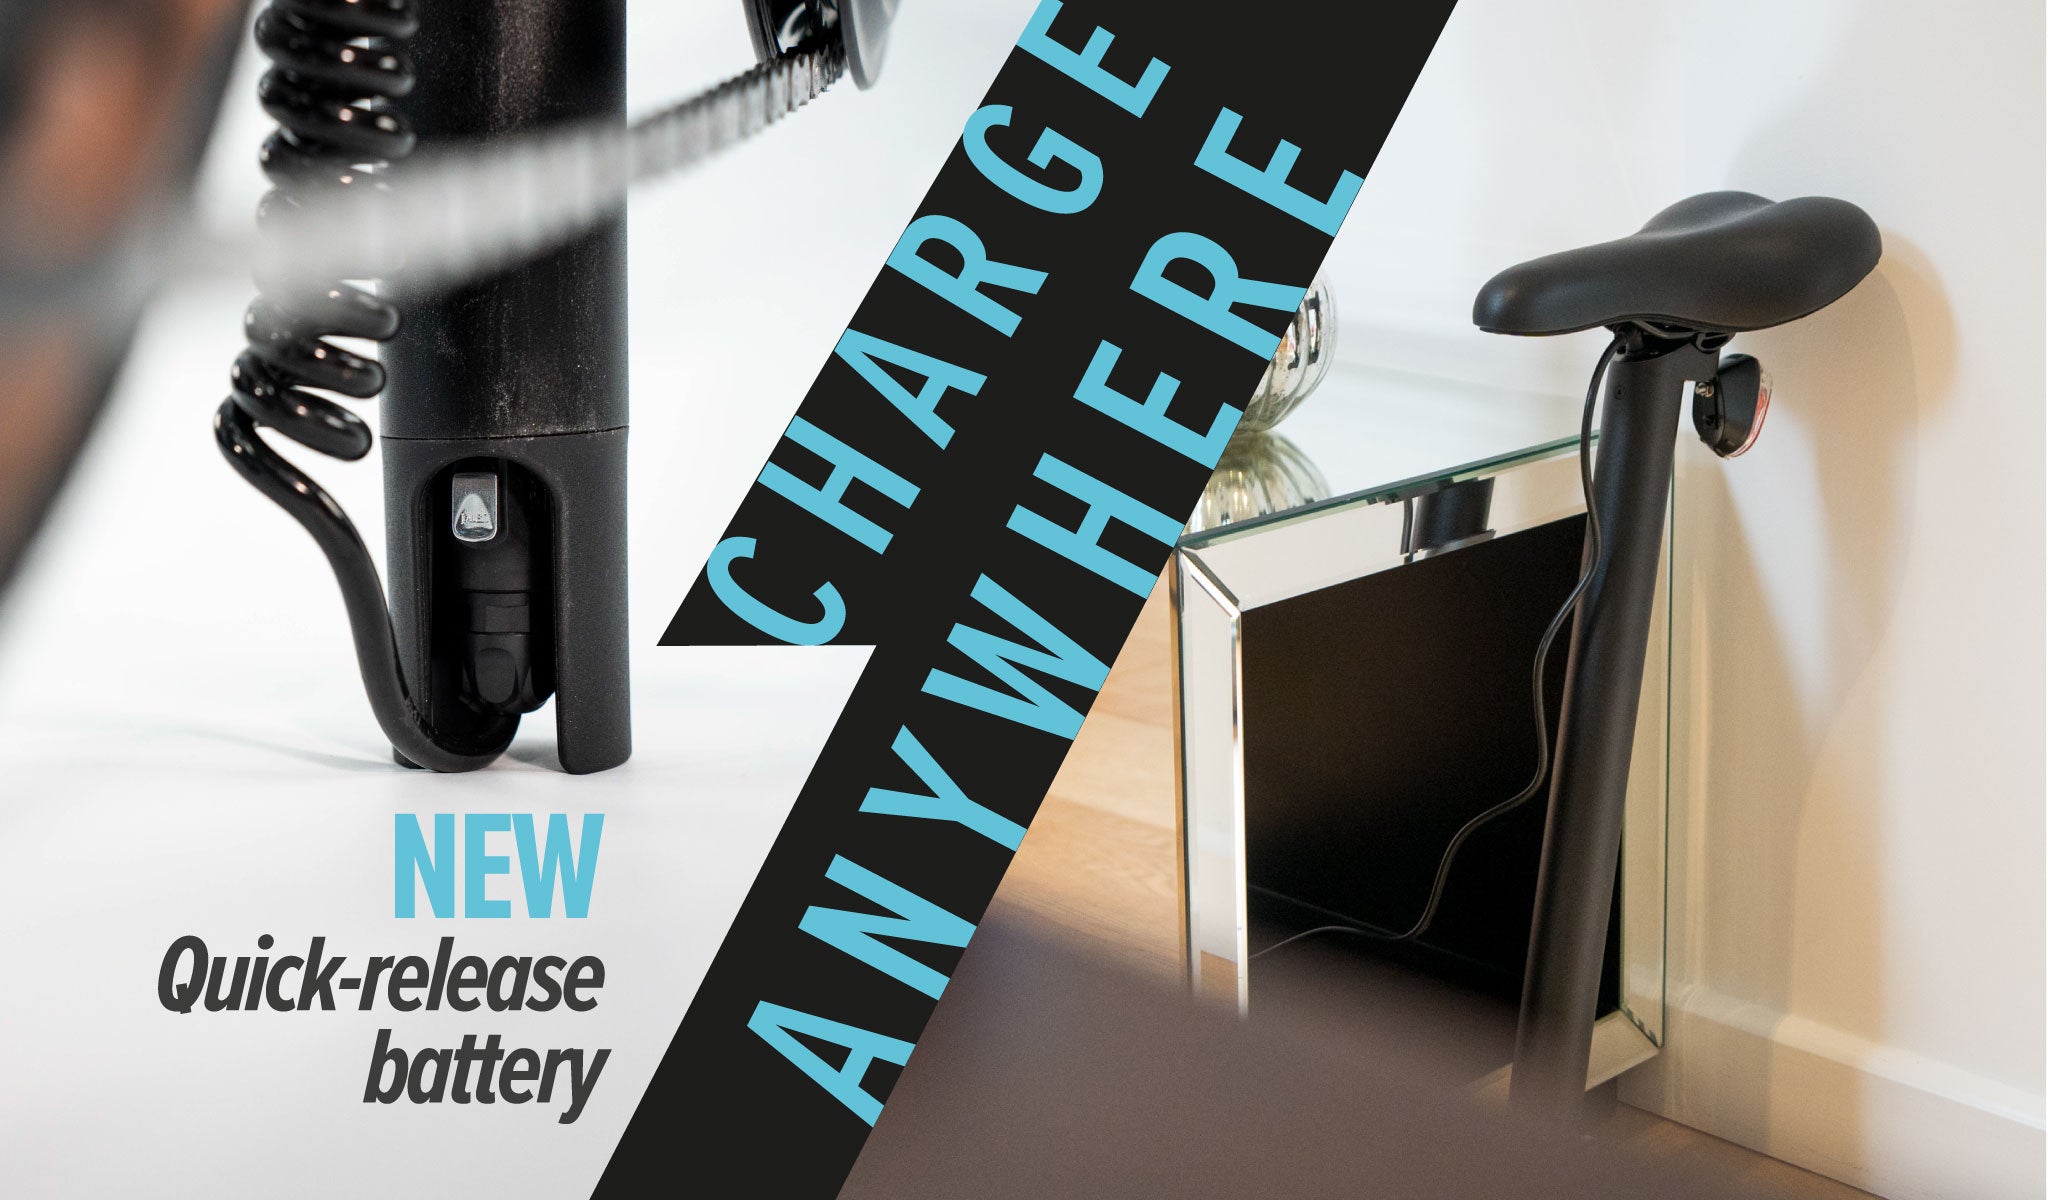 Charge anywhere with a removable seatpost battery featuring a new quick-release system